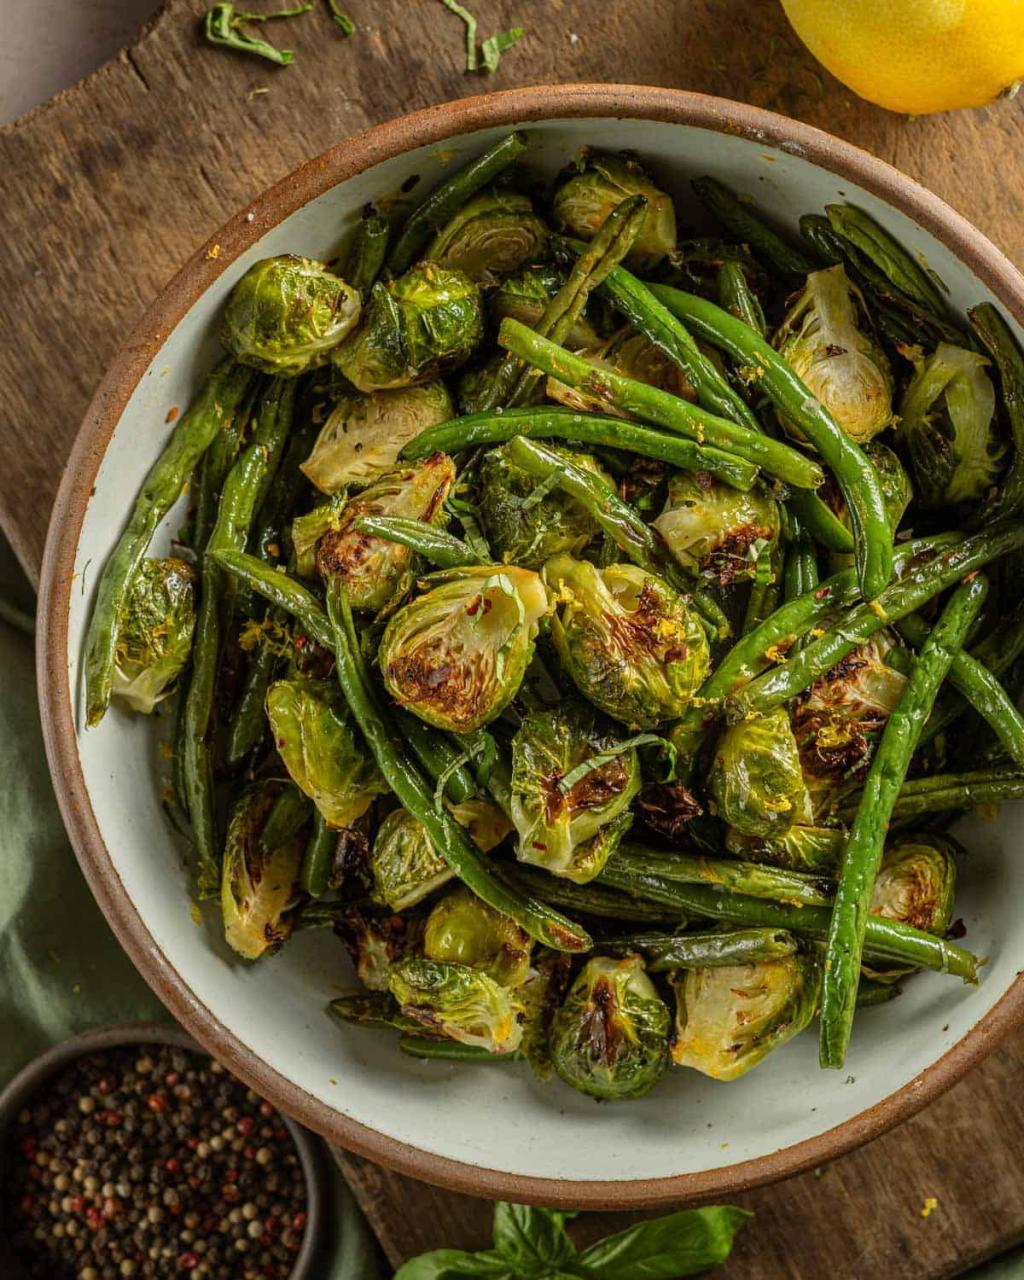 Roasted Green Beans and Brussels Sprouts - Lauren from Scratch